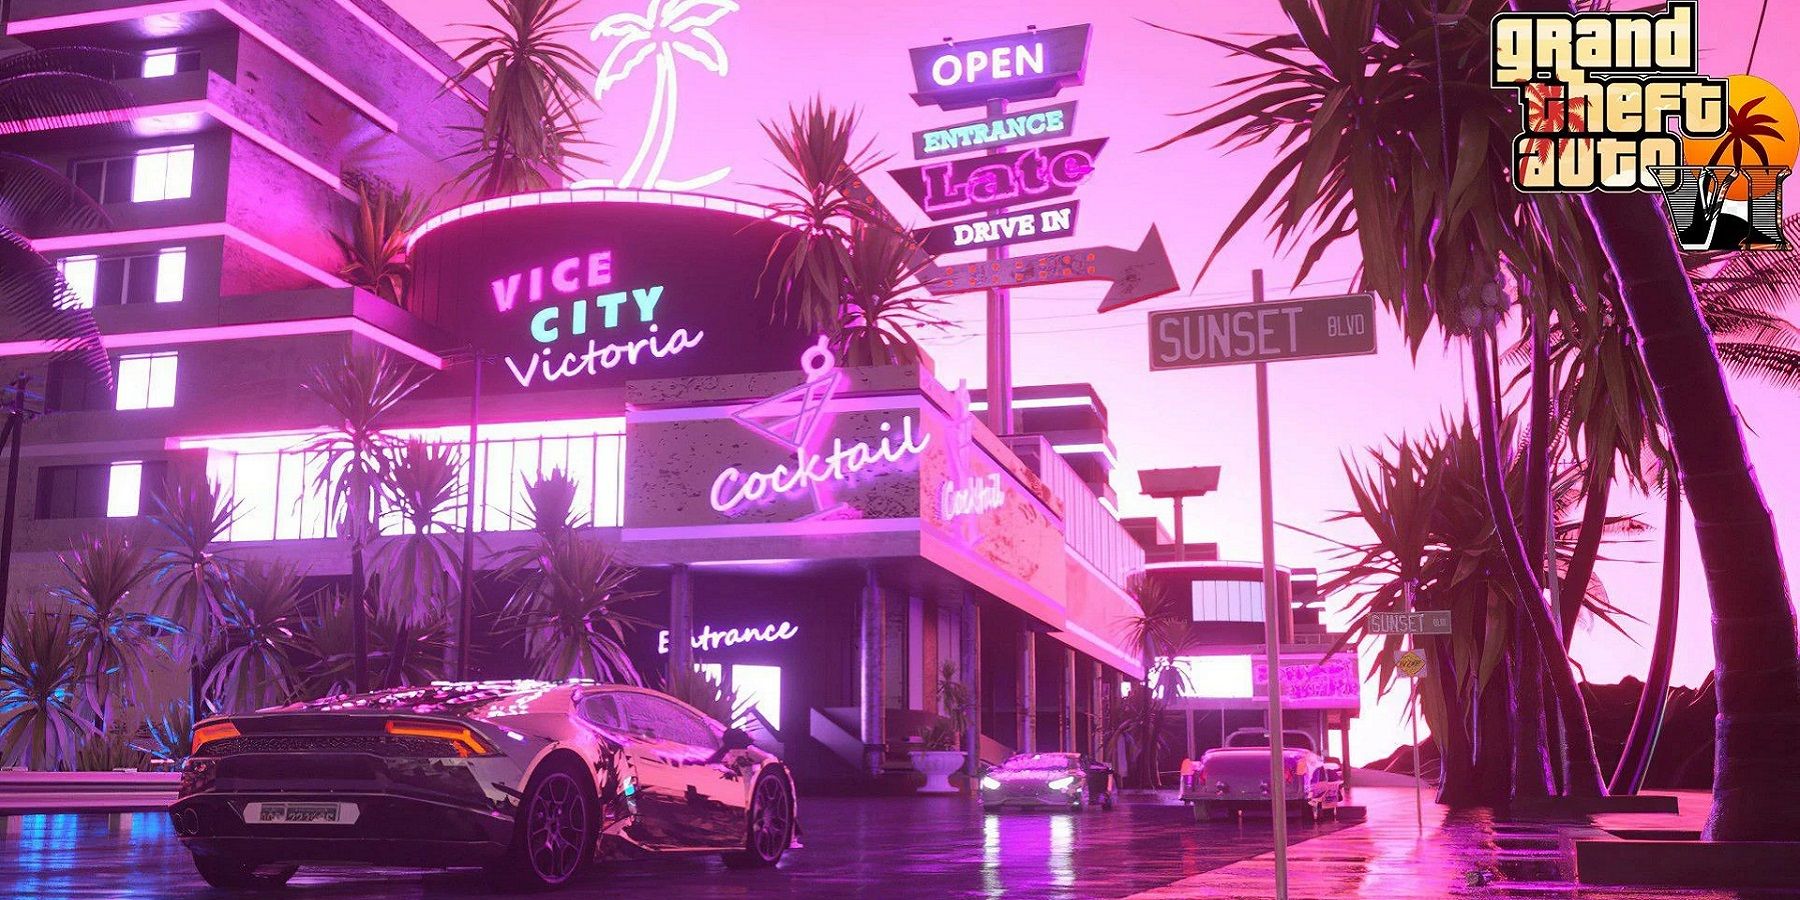 Image of a very neon pink Vice City from the Grand Theft Auto games.